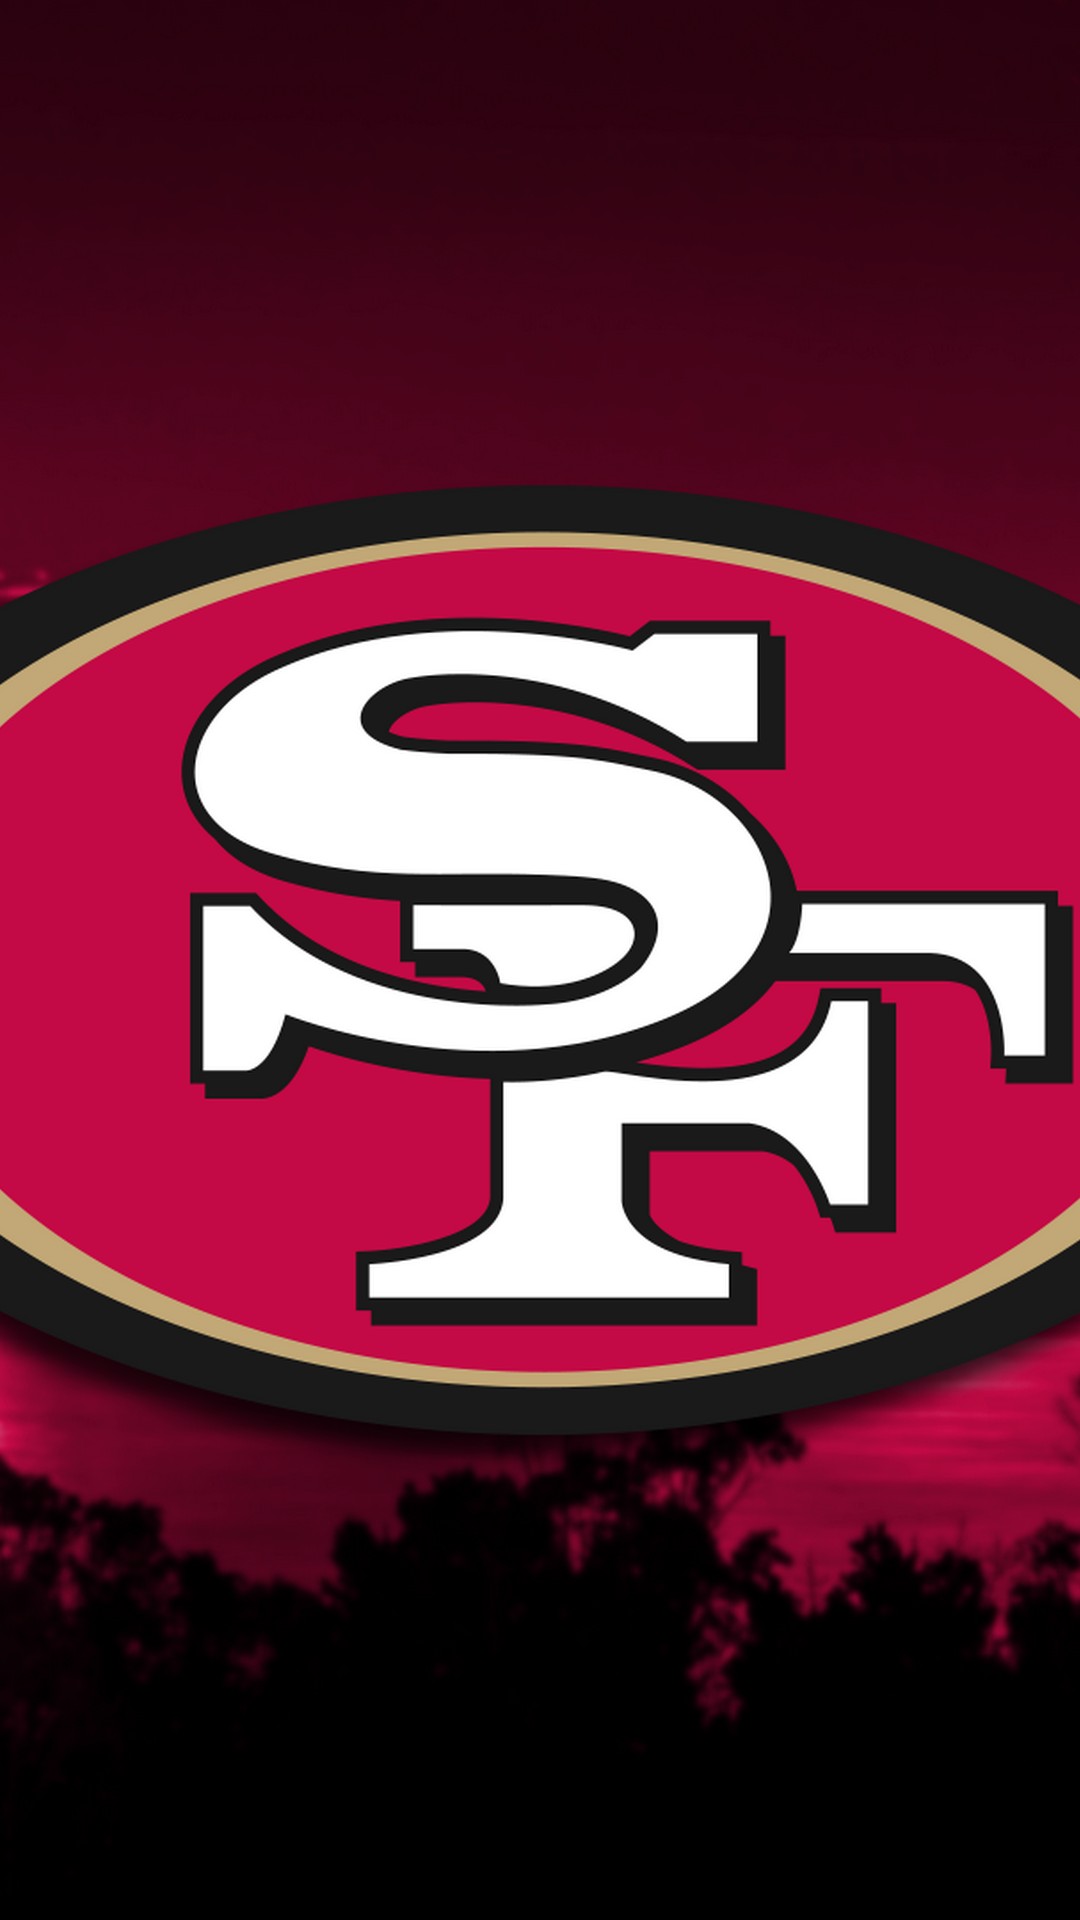 49ers iPhone Wallpaper Tumblr With high-resolution 1080X1920 pixel. Download and set as wallpaper for Desktop Computer, Apple iPhone X, XS Max, XR, 8, 7, 6, SE, iPad, Android